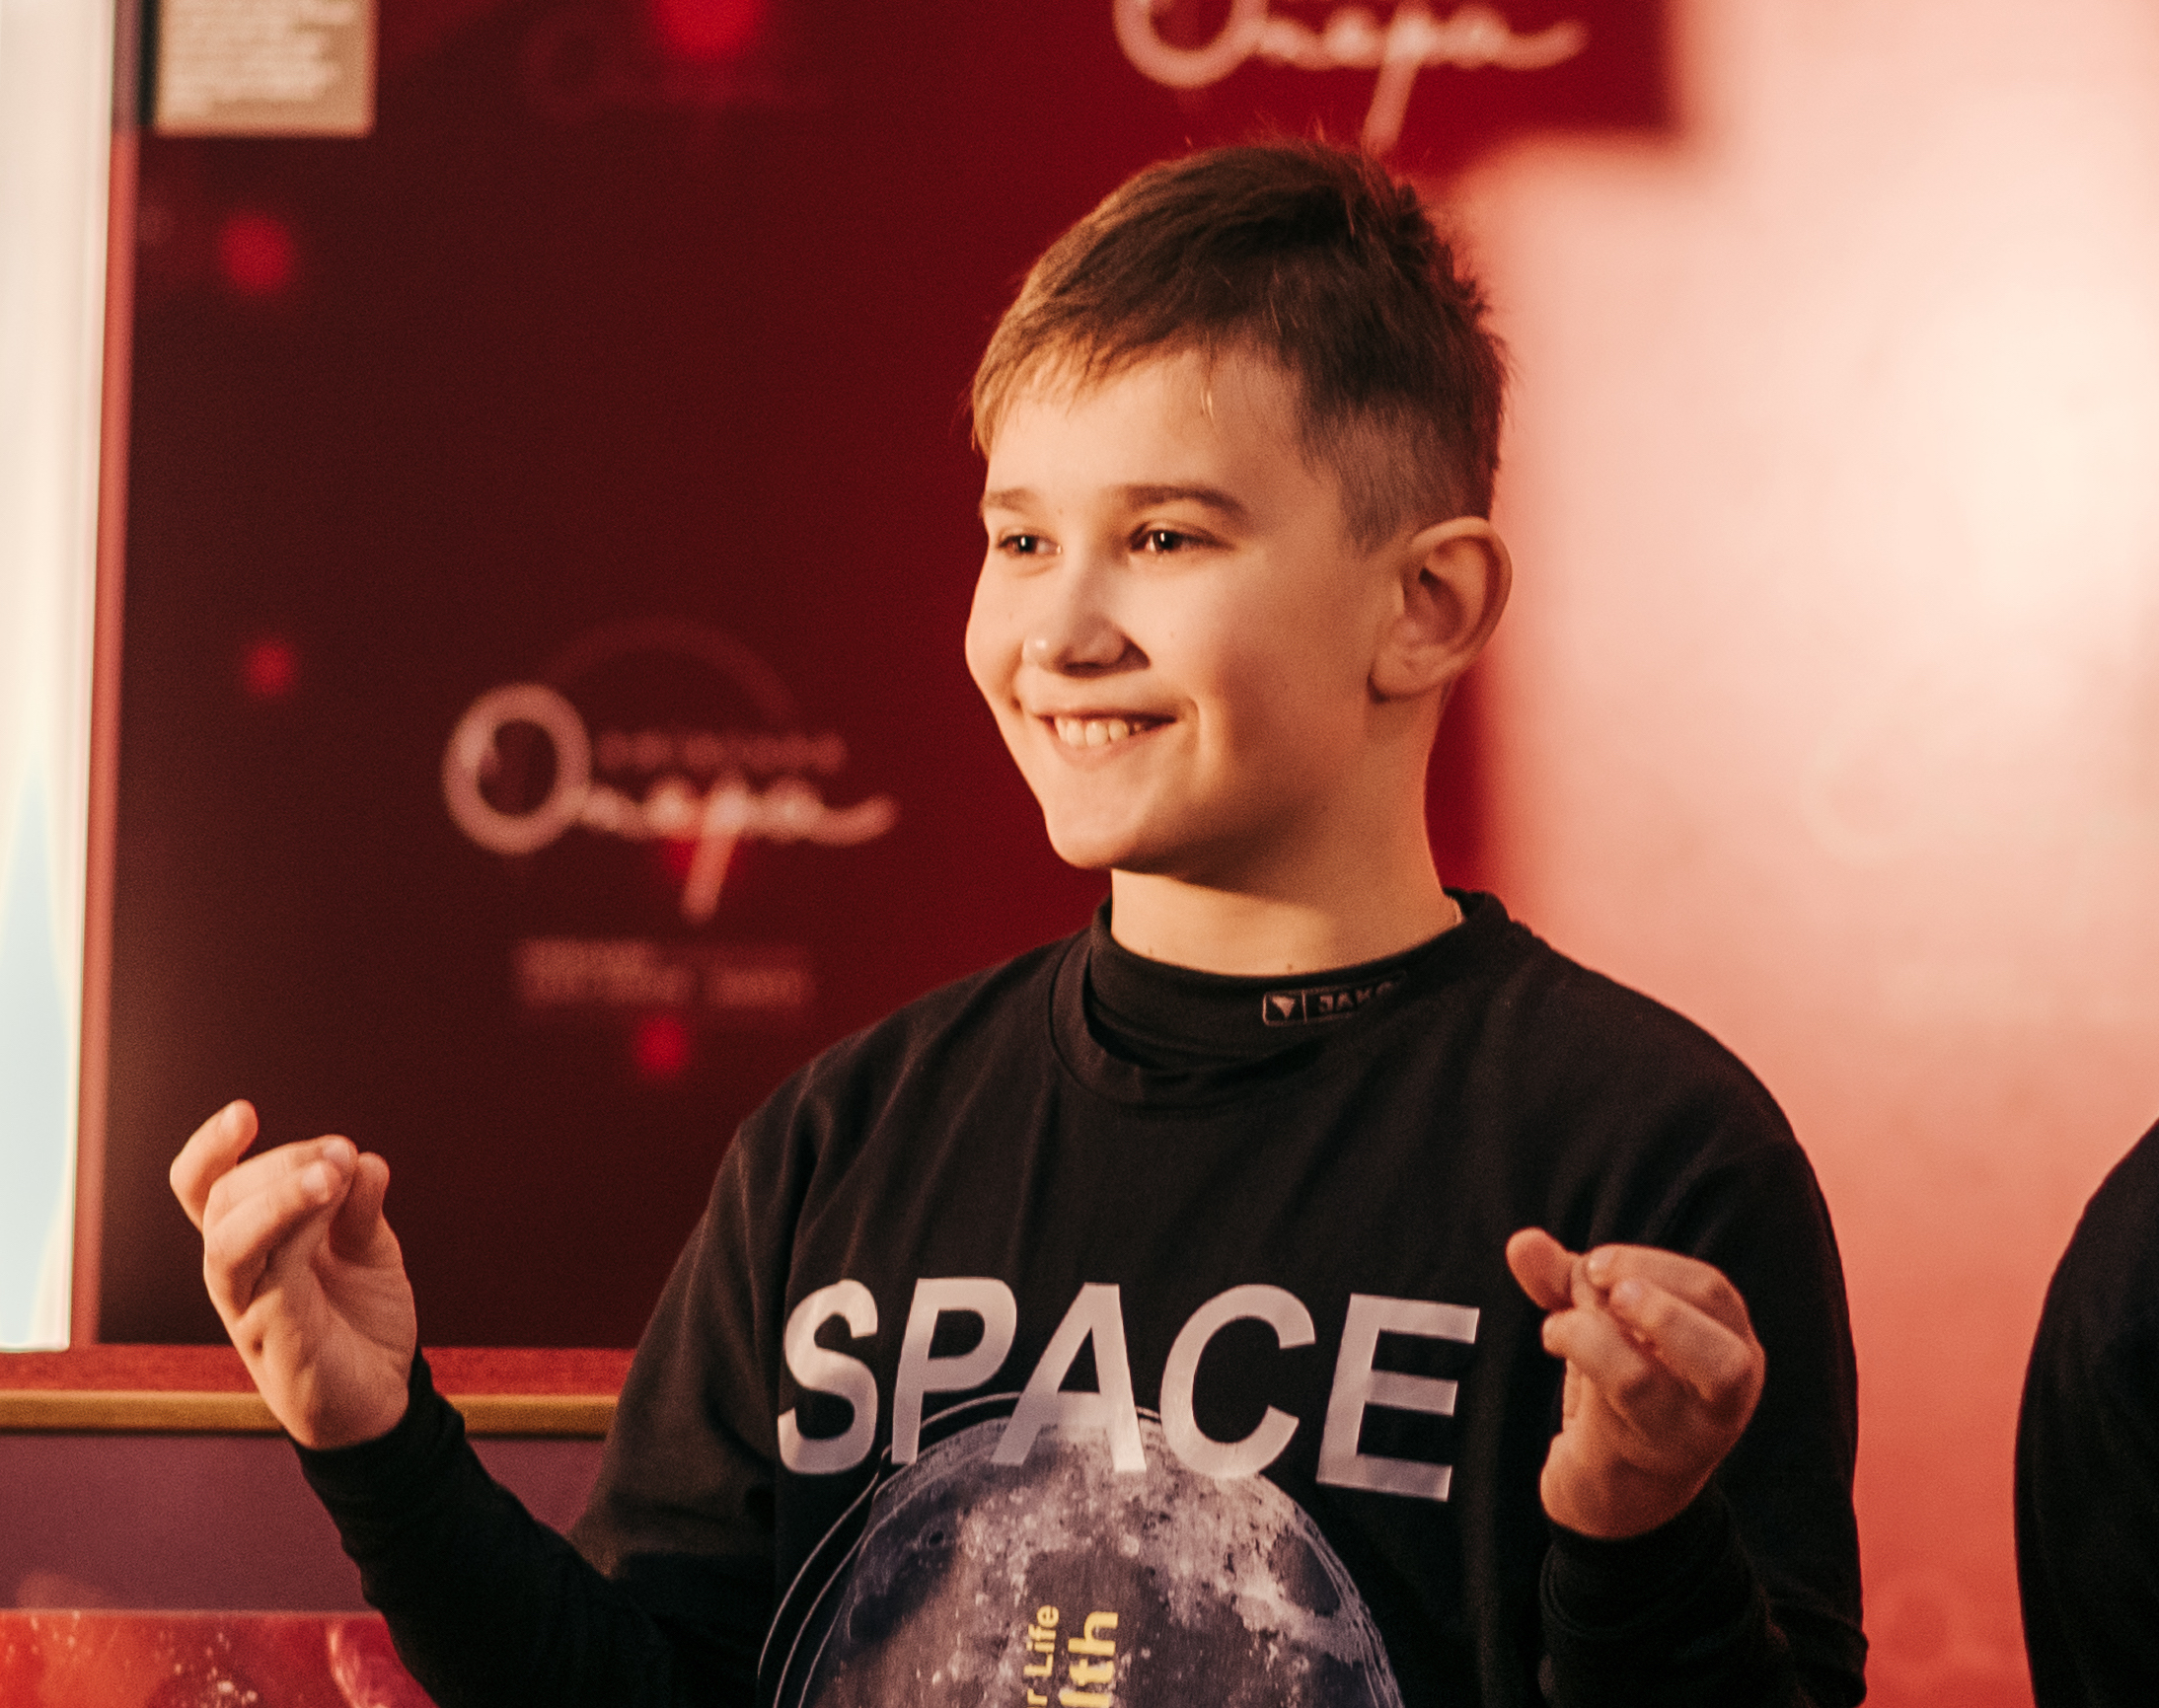 A 10-year-old autistic artist presented his paintings to Elon Mask and Maxim Polyakov